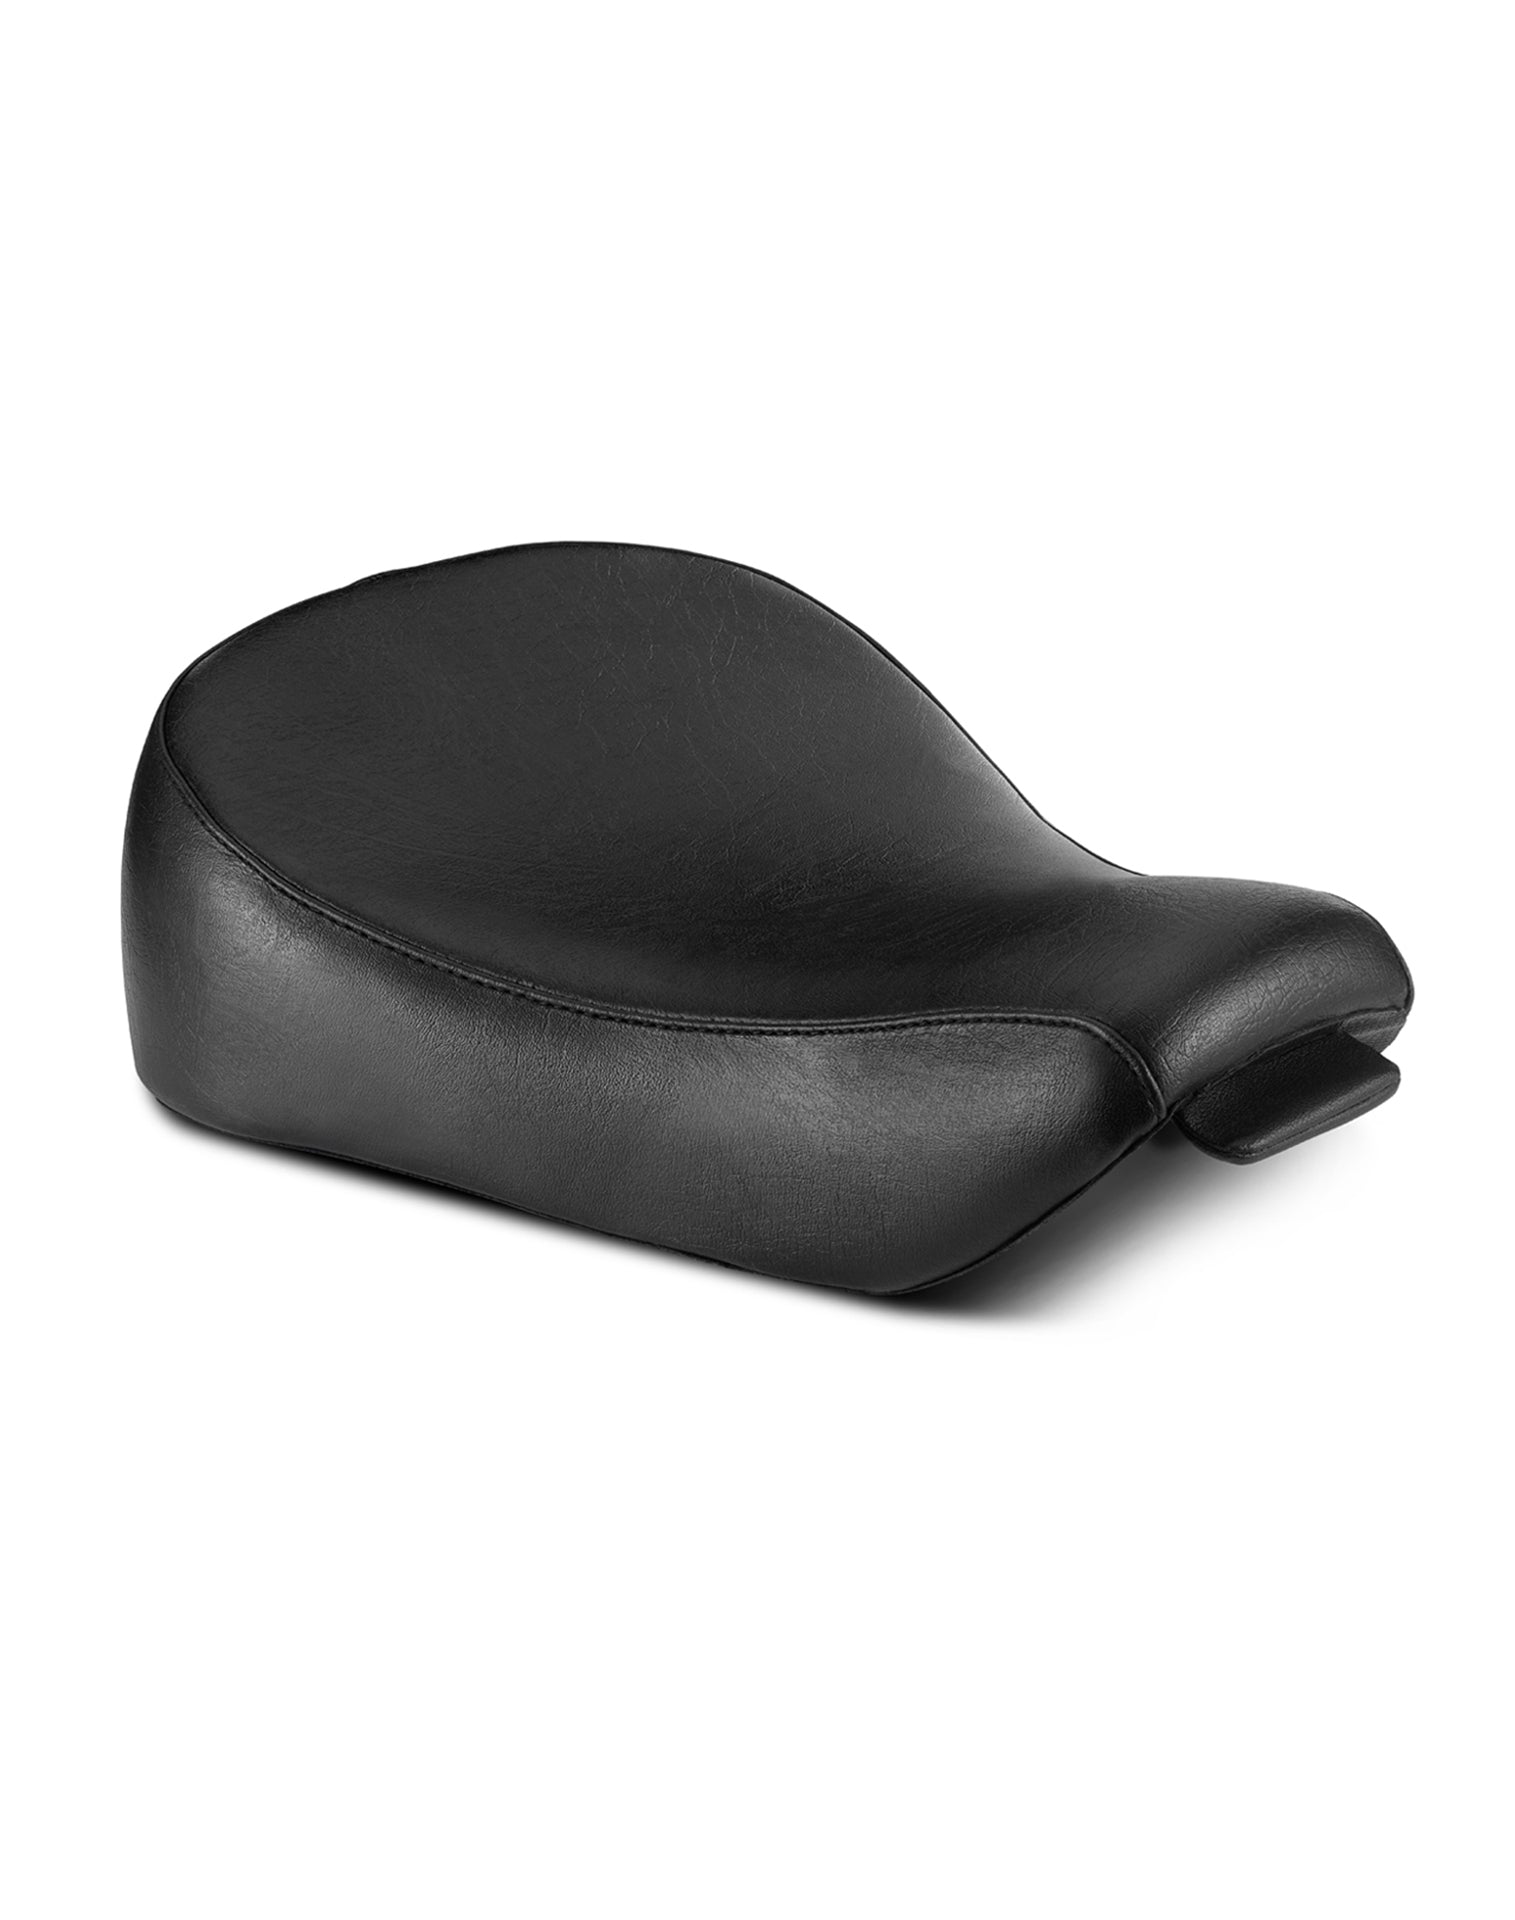 Iron Born Plain Design Motorcycle Solo Seat for Sportster 883 Low XL883L Main view